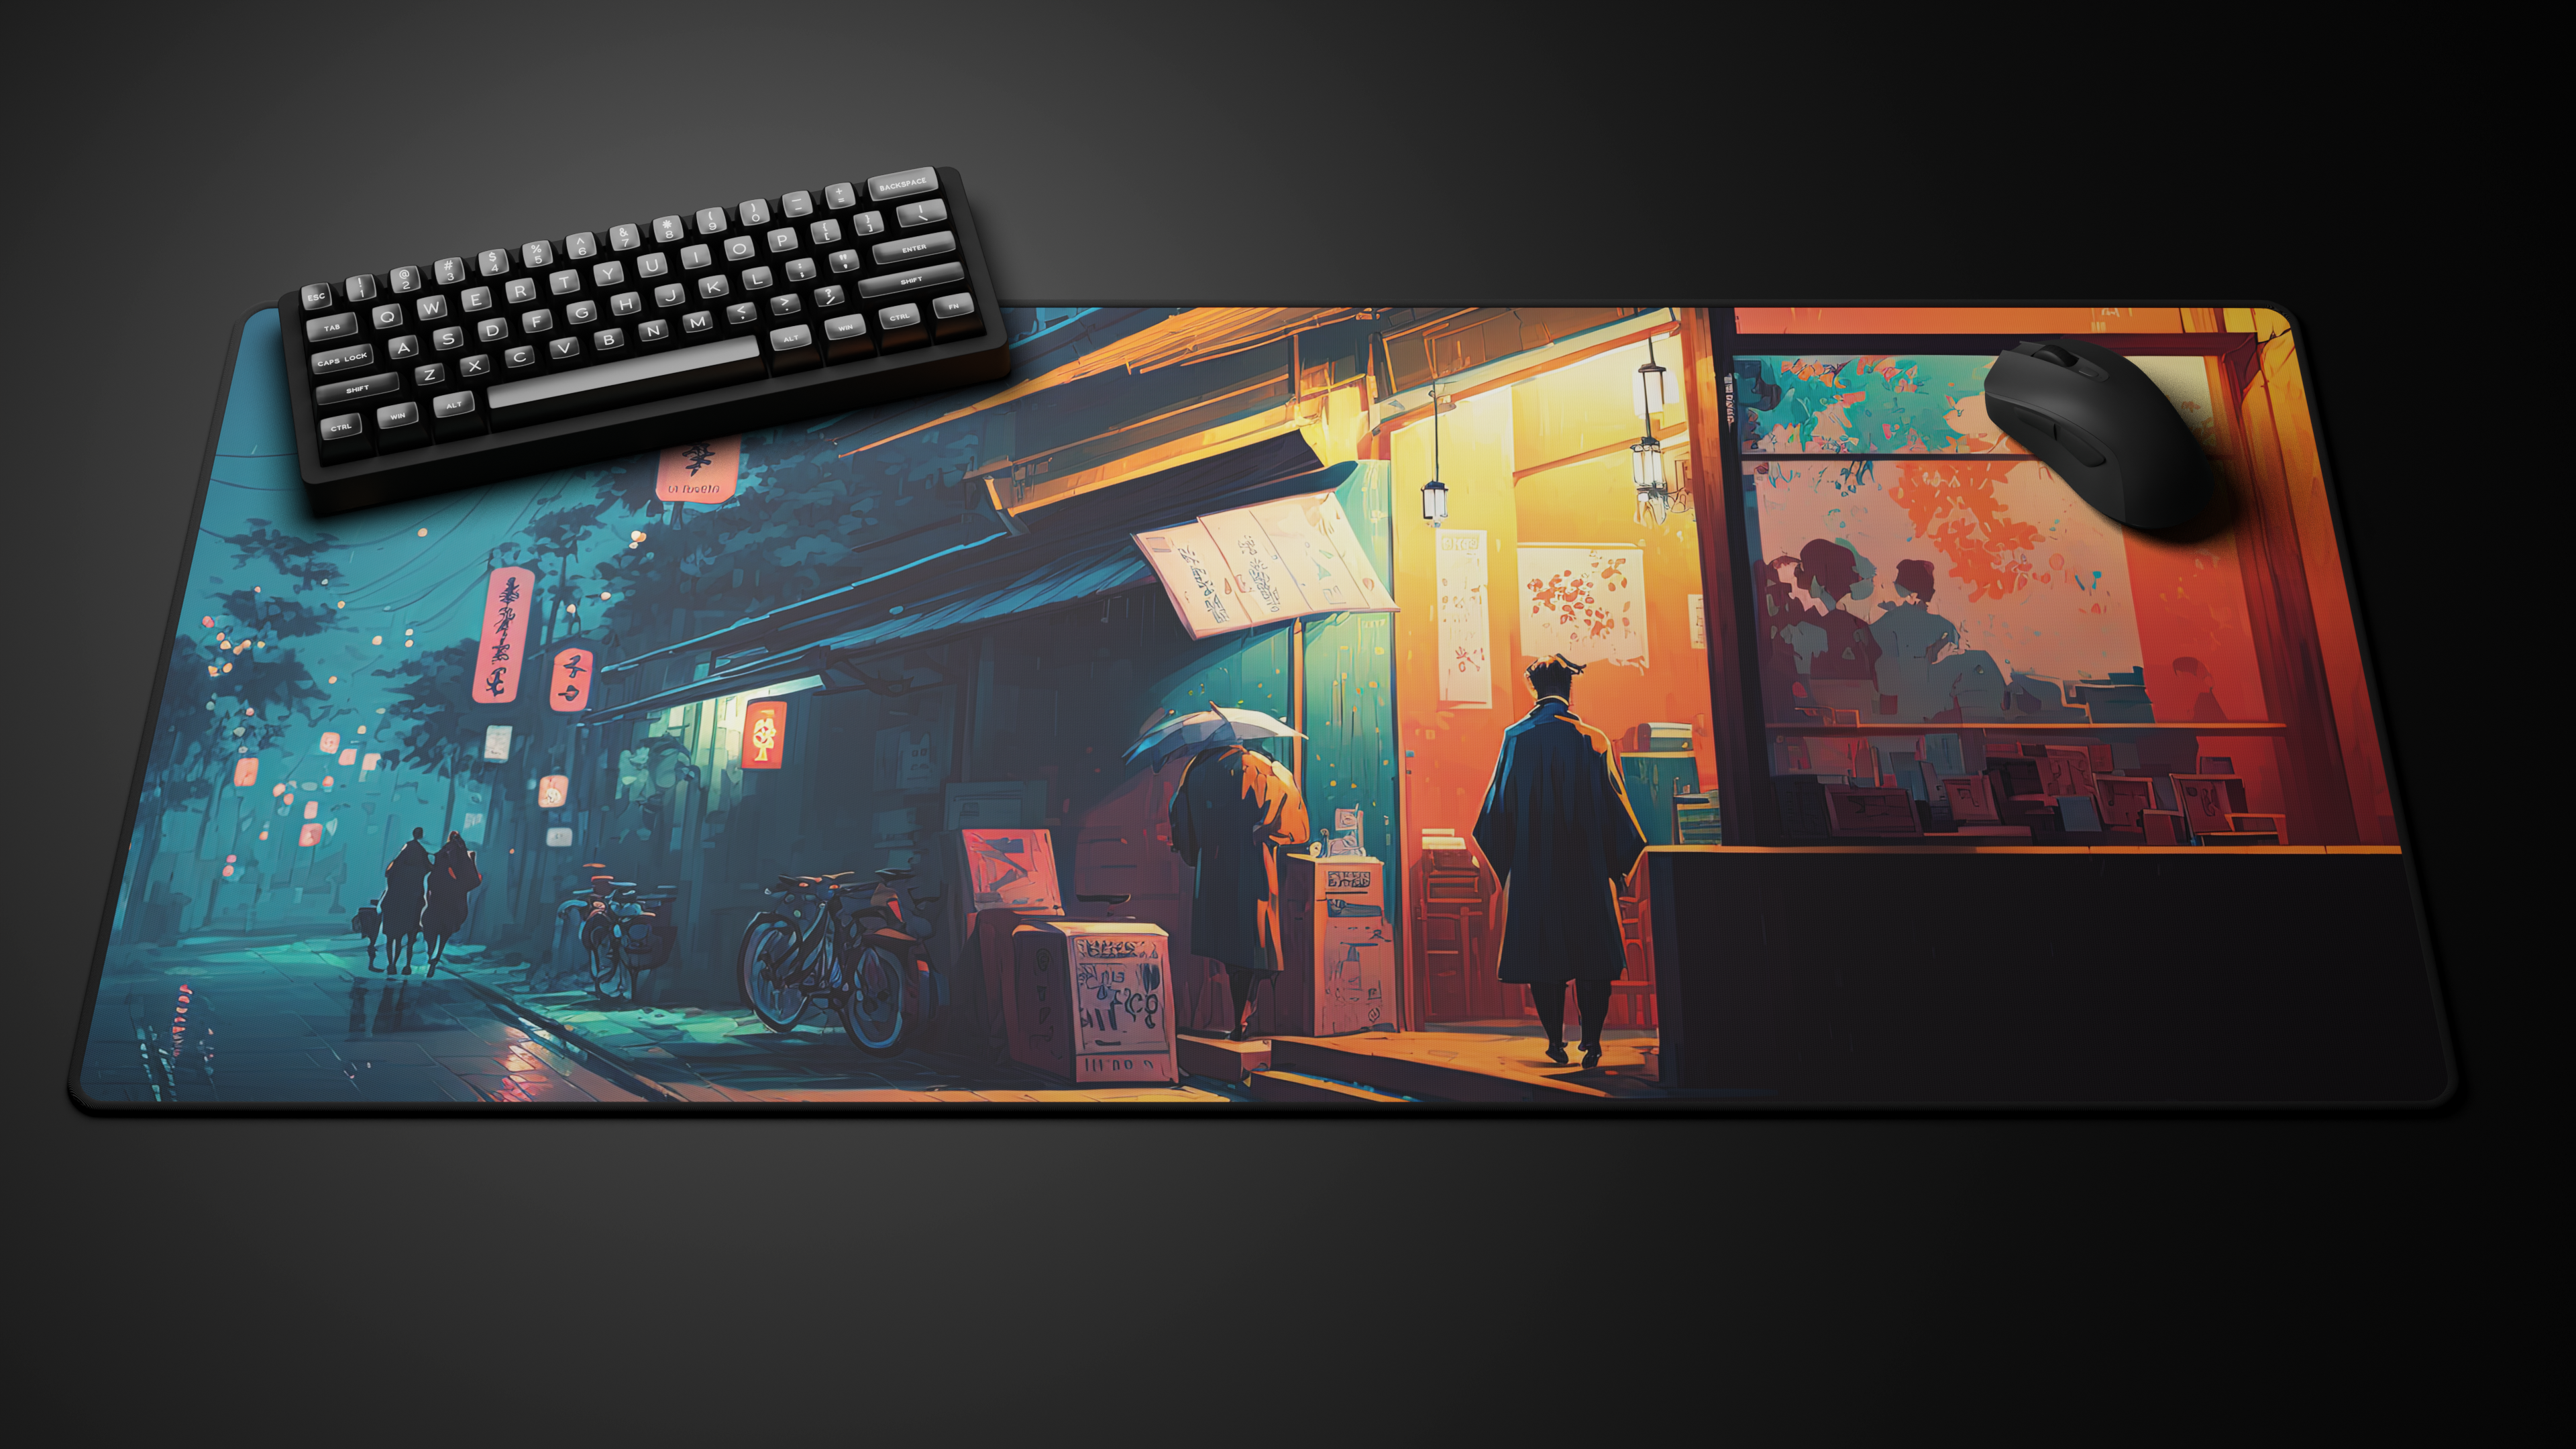 Deskmat 'Winter Collection - Japanese Street' by glutch